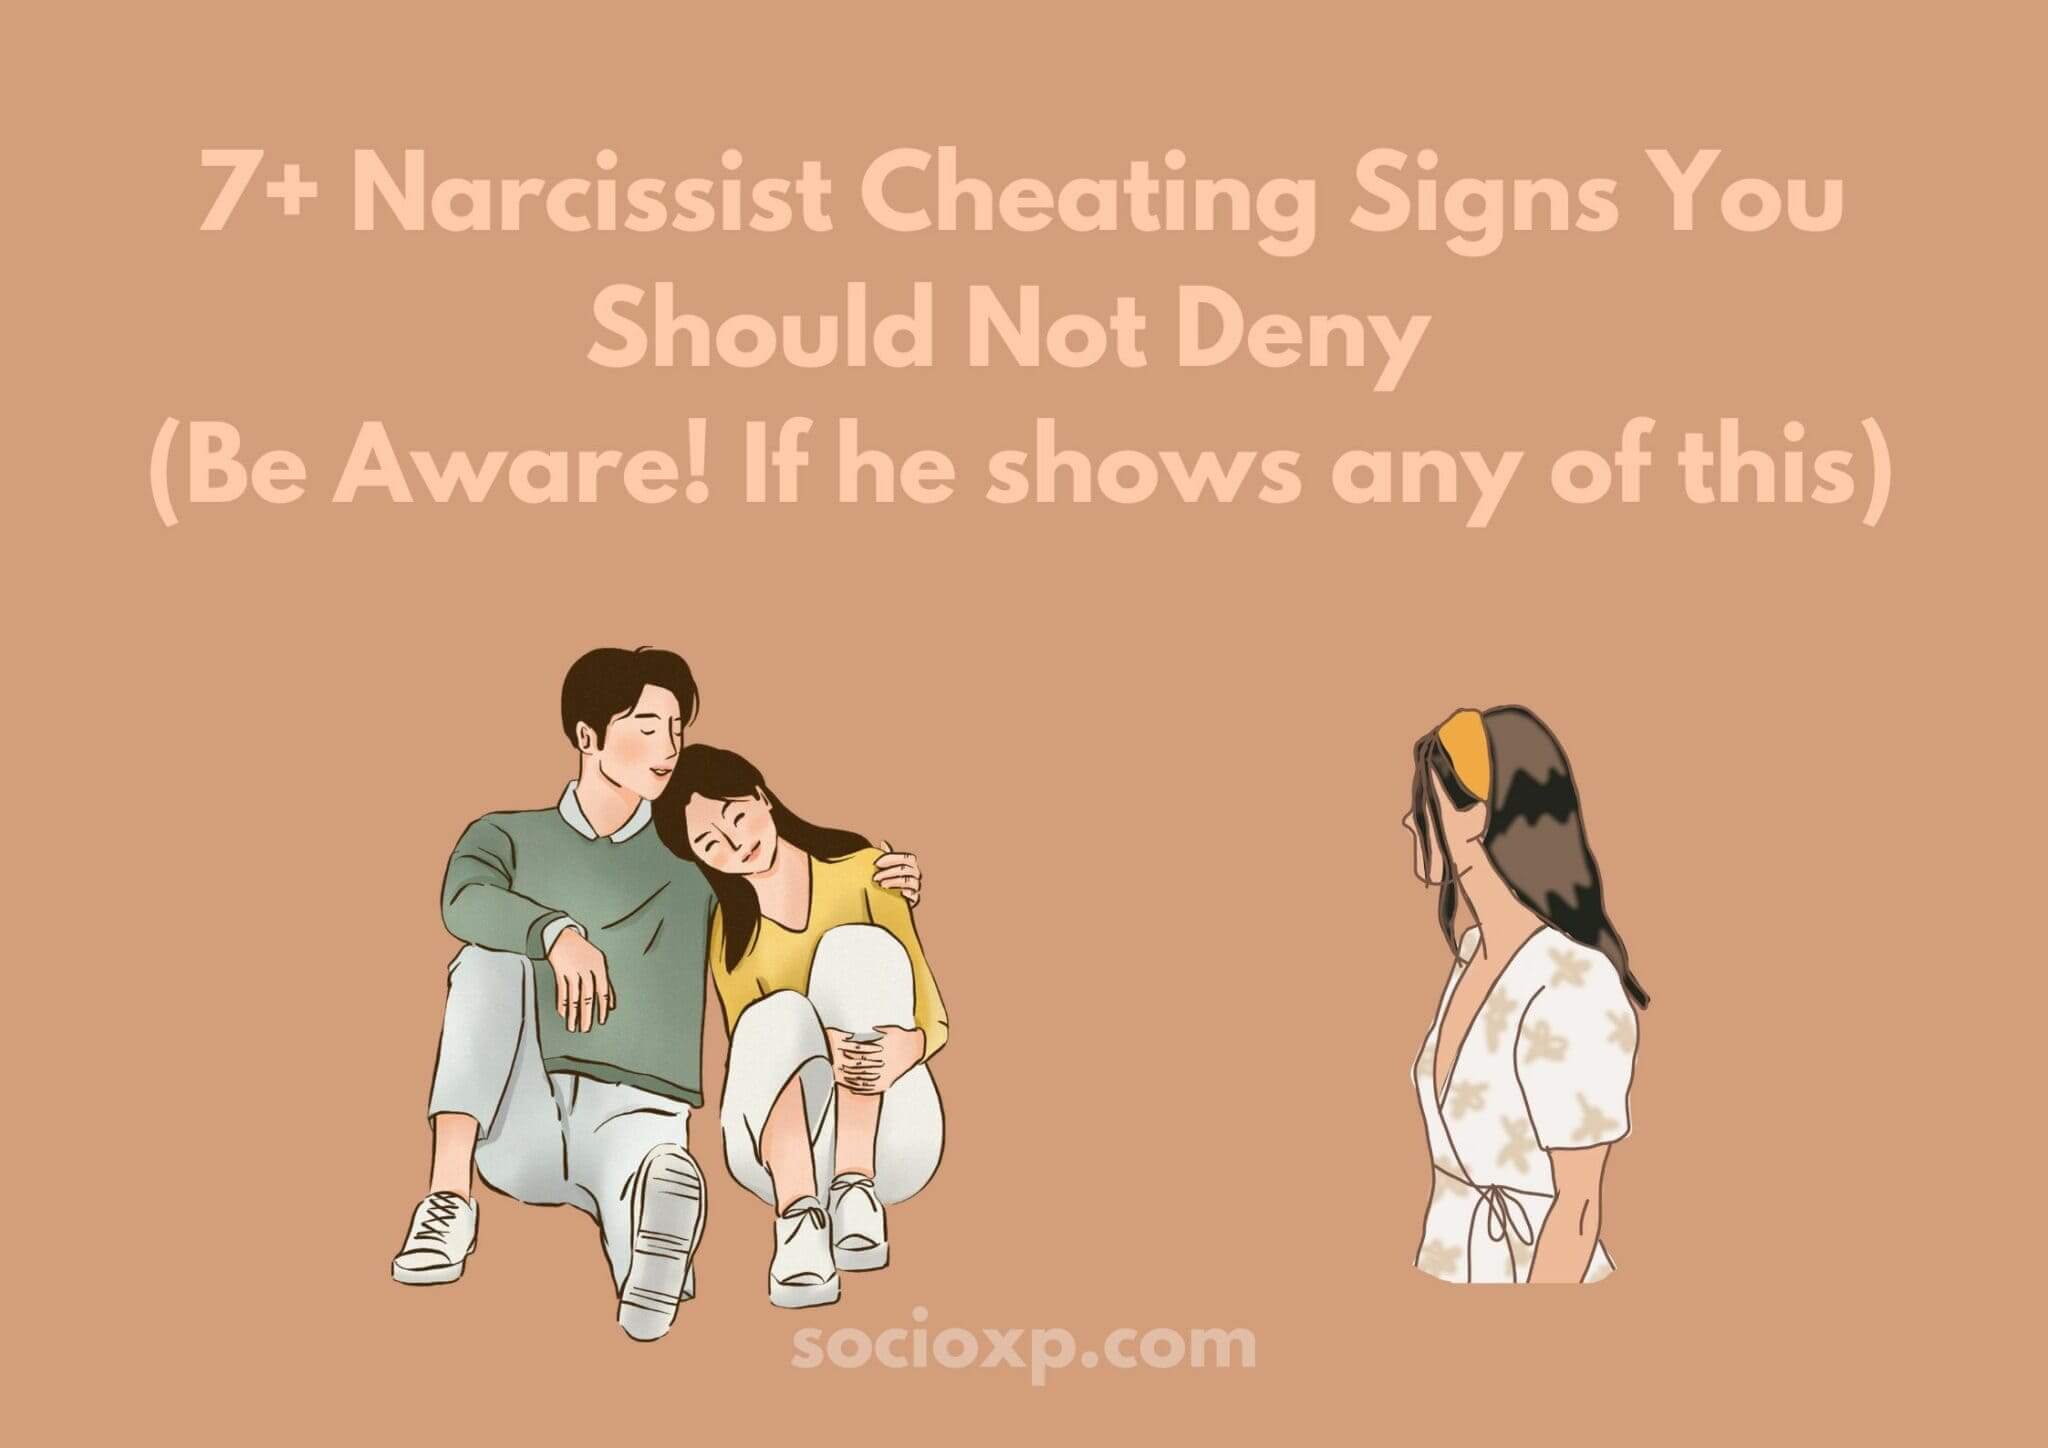 7+ Narcissist Cheating Signs You Should Not Deny (Be Aware! If he shows any of this)